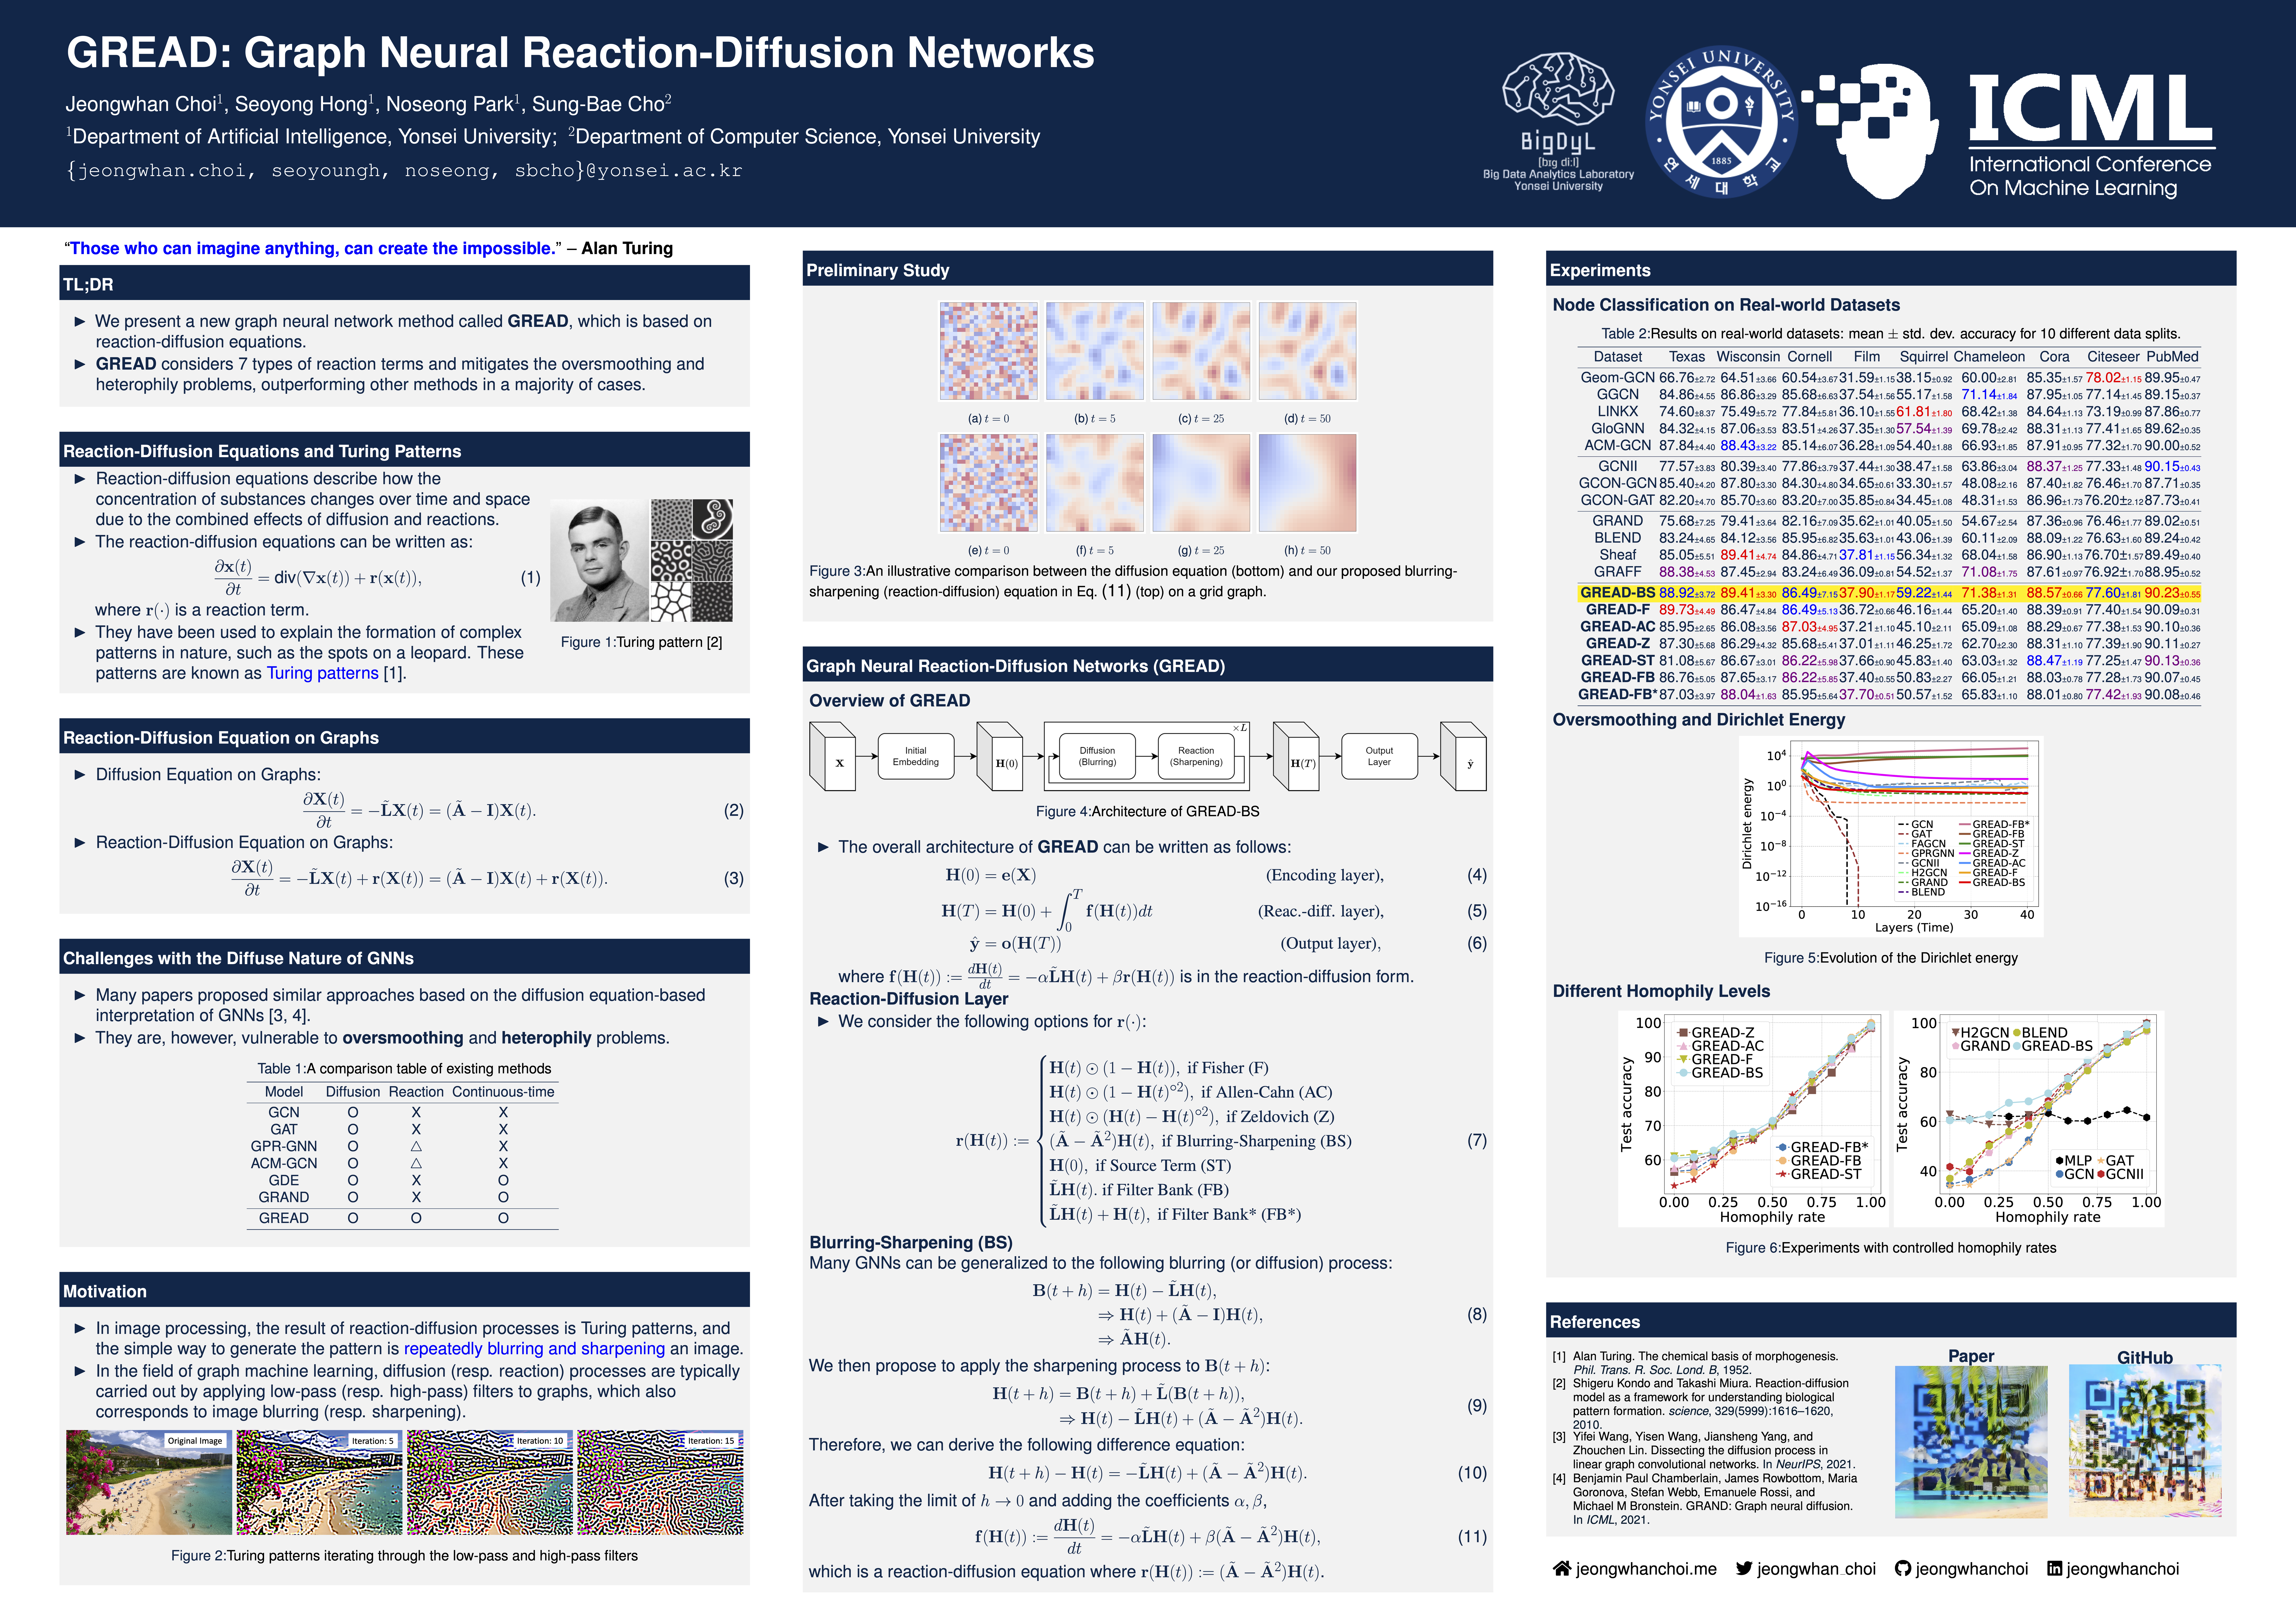 GREAD: Graph Neural Reaction-Diffusion Networks